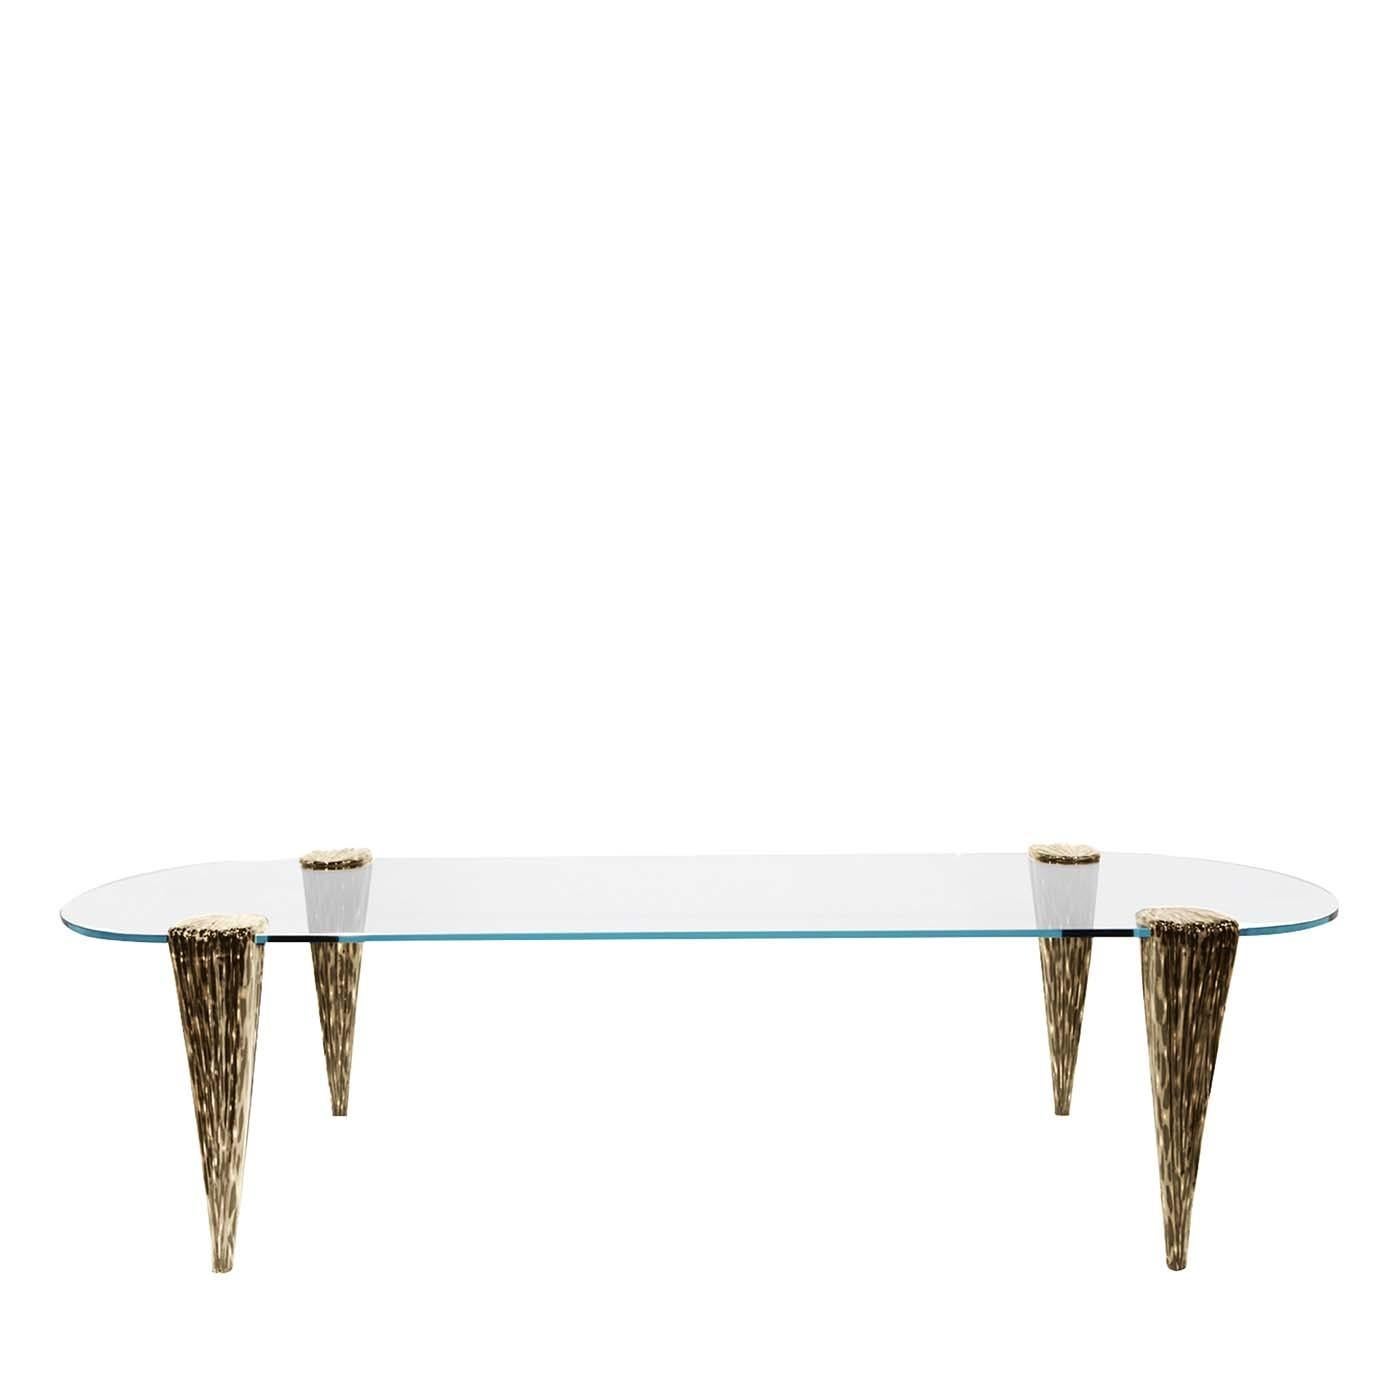 Part of the Opus Futura collection, this glass table is a superb choice for a contemporary or eclectic dining room, where it will be at its best surrounded with the Opus Futura or the Opus Metallica chairs. Its unique silhouette comprises four